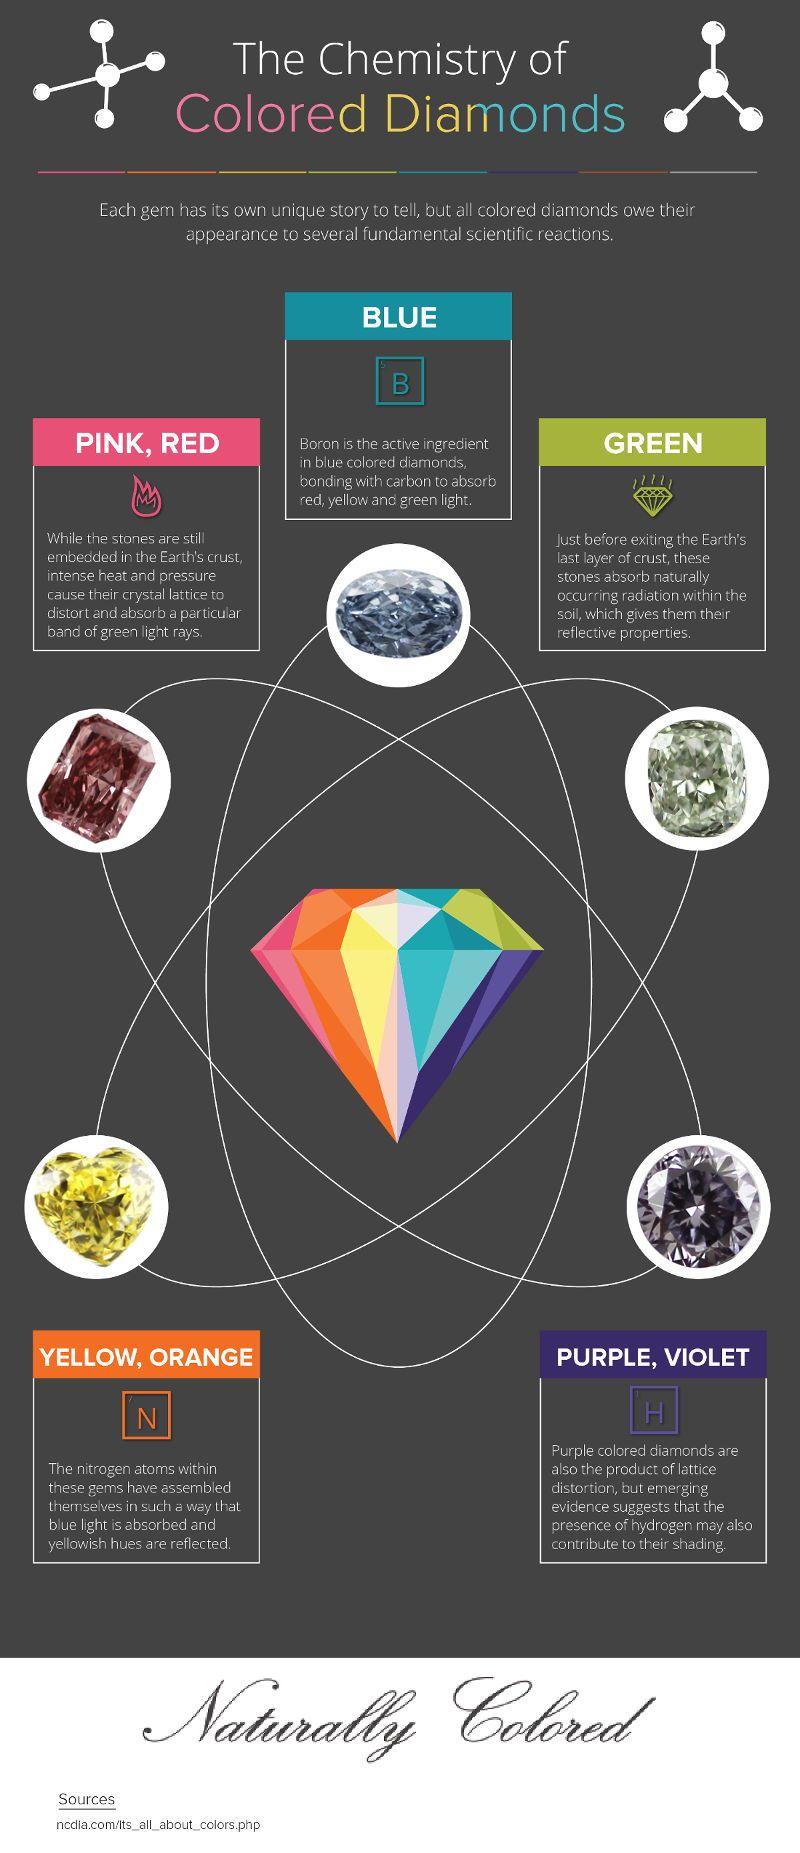 Color Diamond Logo - How Are Colored Diamonds Made? Natural & Treated | Naturally Colored